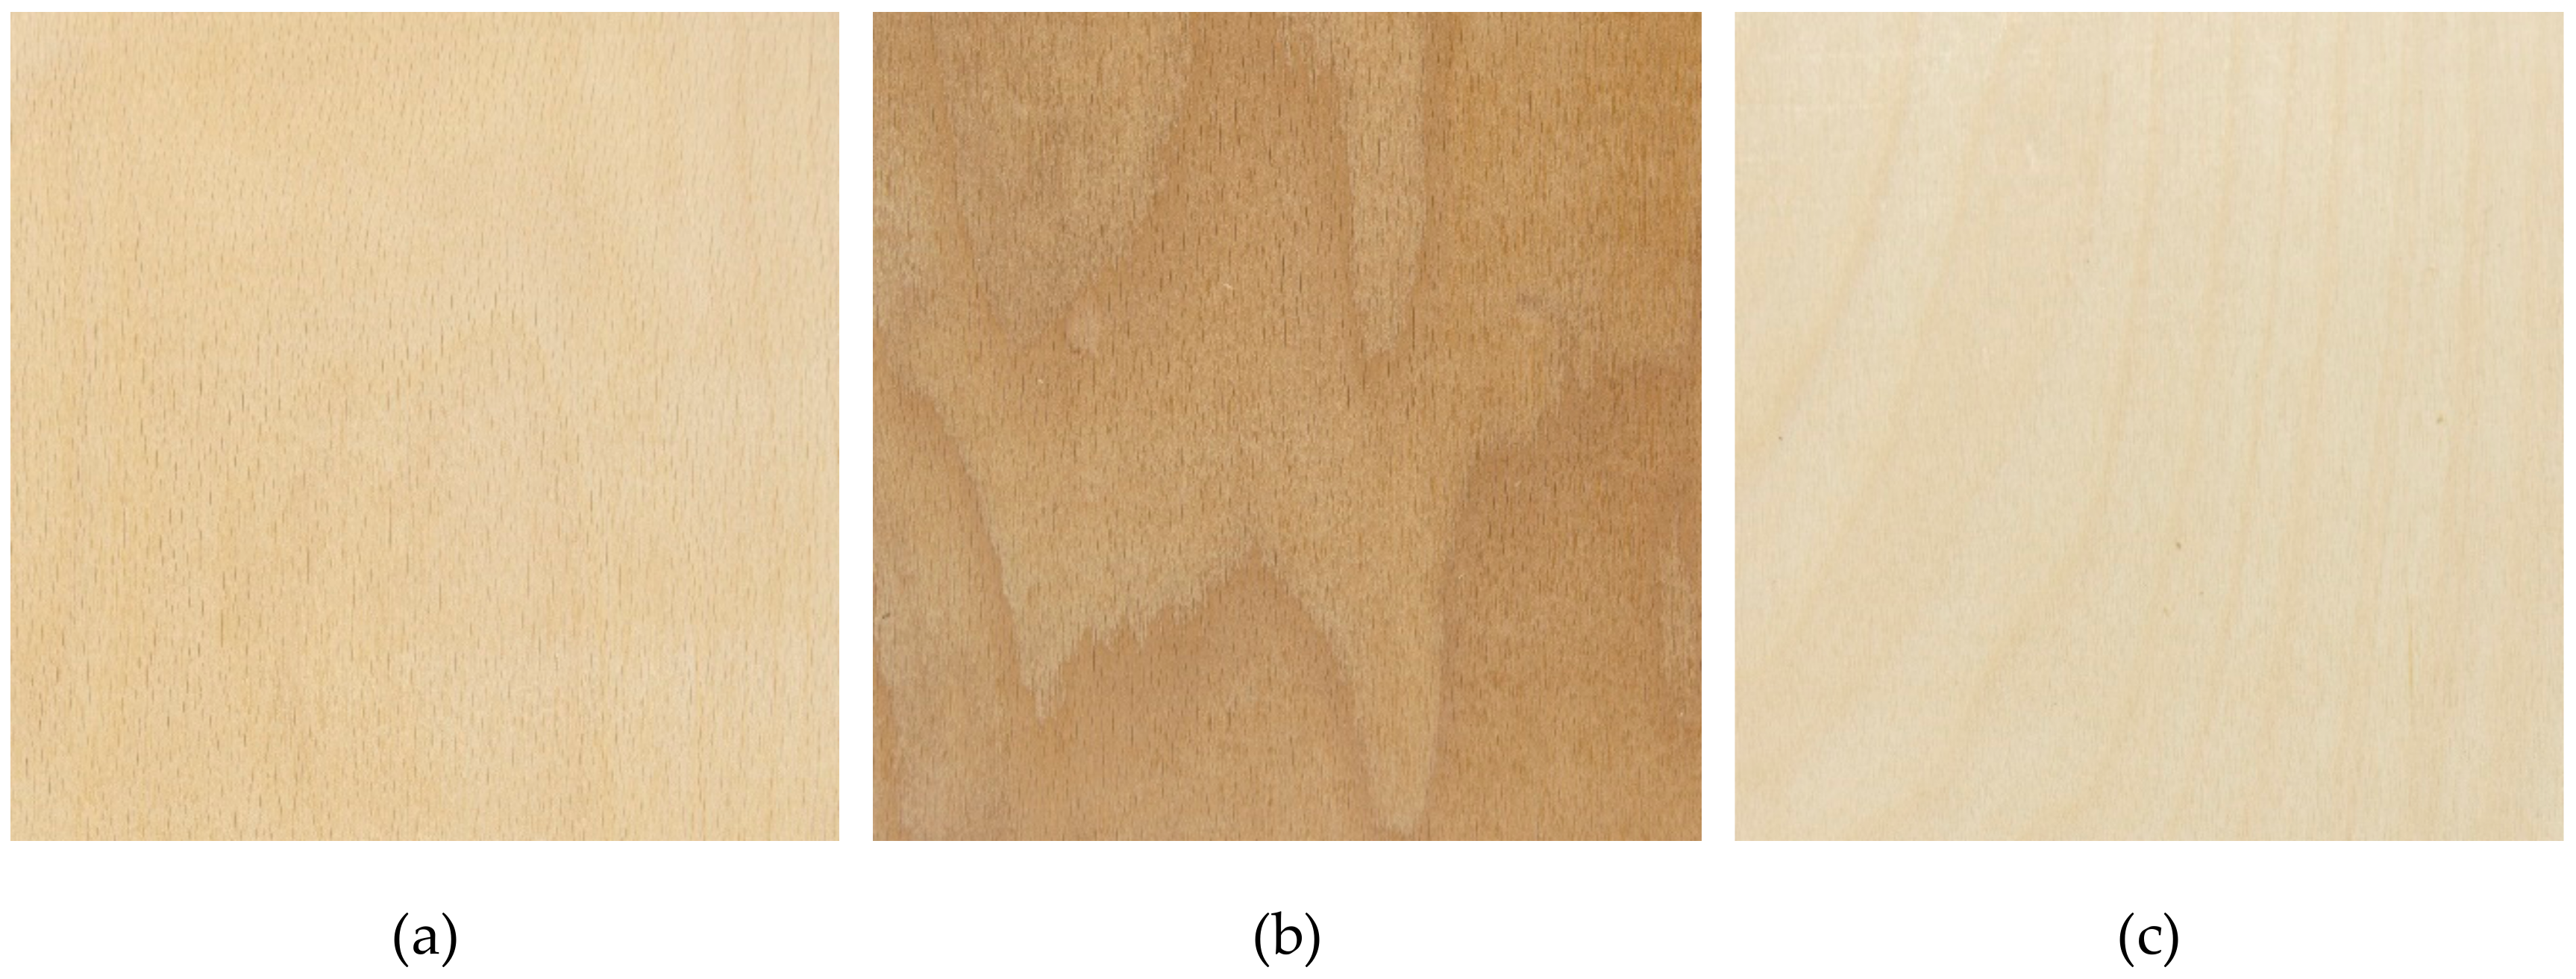 Forests Free Full Text Influence Of Site Conditions And Quality Of Birch Wood On Its Properties And Utilization After Heat Treatment Part Ii Surface Properties And Marketing Evaluation Of The Effect Of